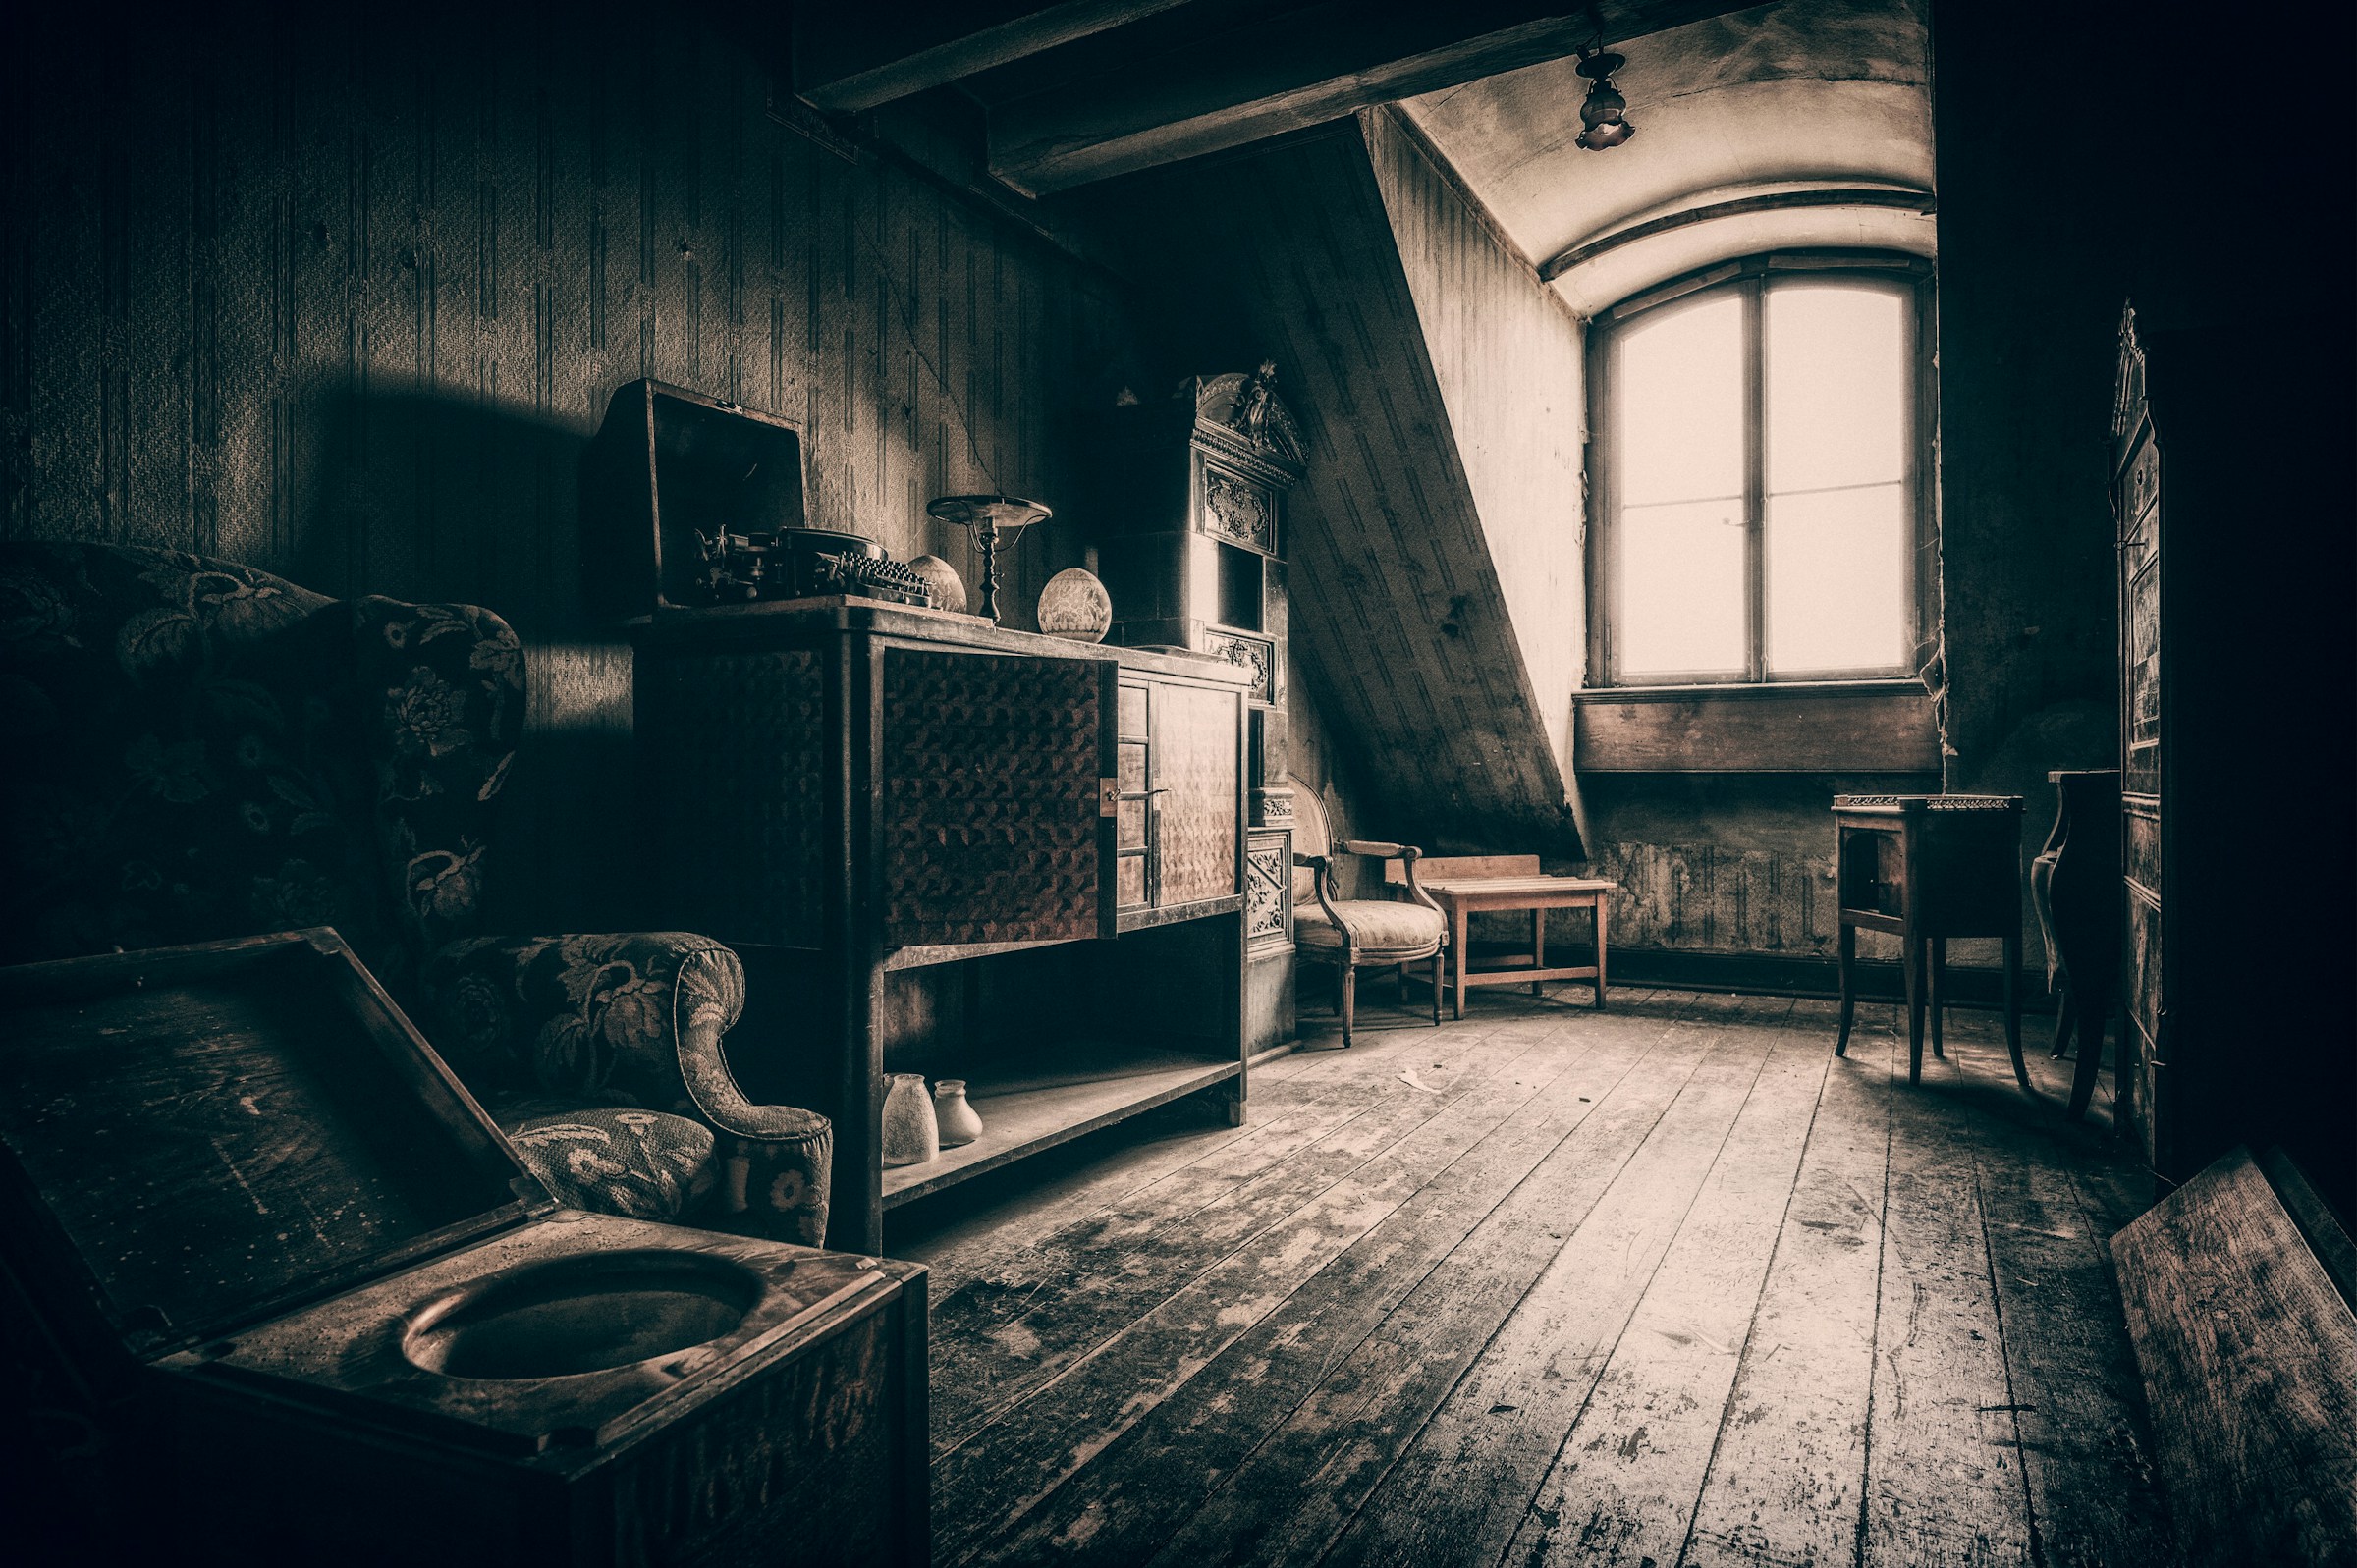 An attic filled with old stuff | Source: Unsplash